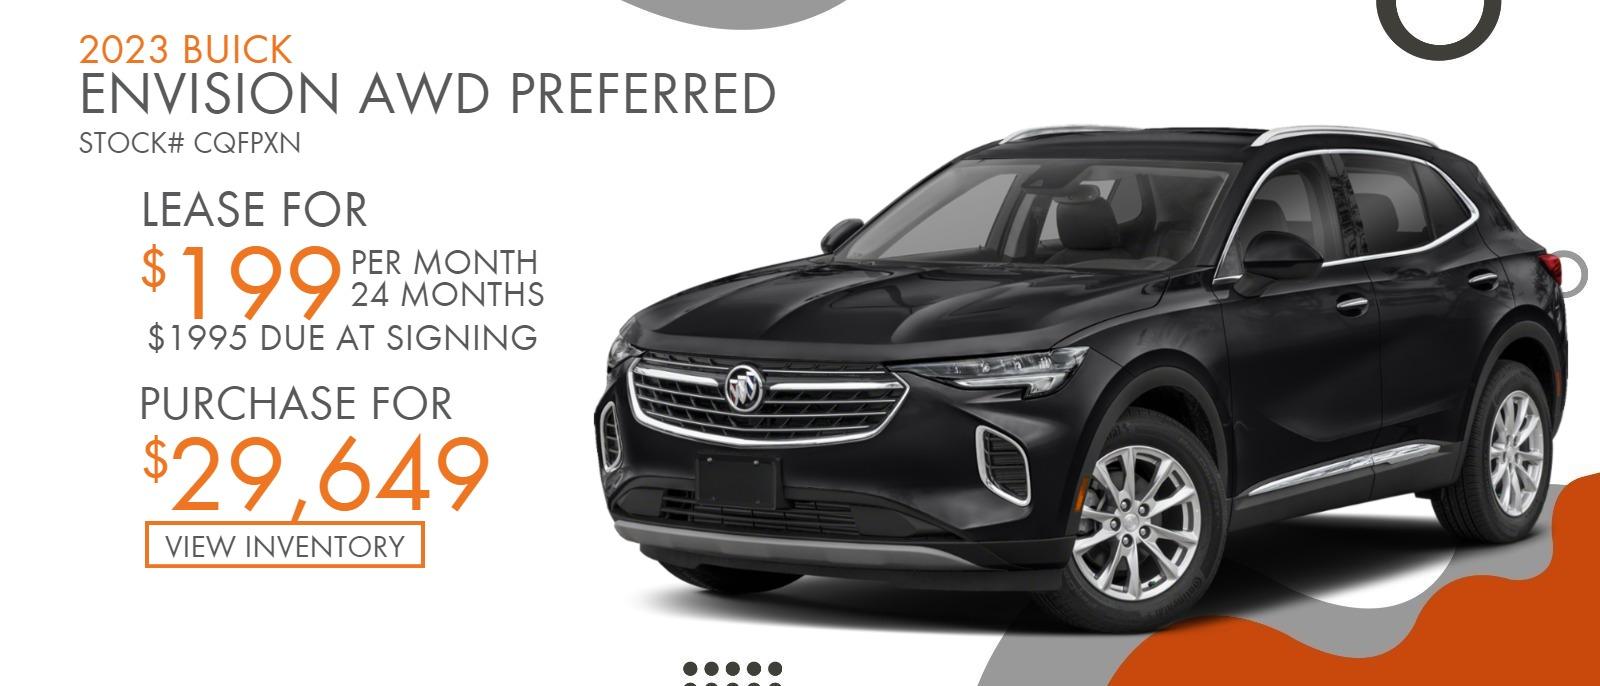 2023 Envision Preferred AWD
Stock# CQFPXN
Lease for $199 per month, 24 months, $1995 down
Purchase for $29,649